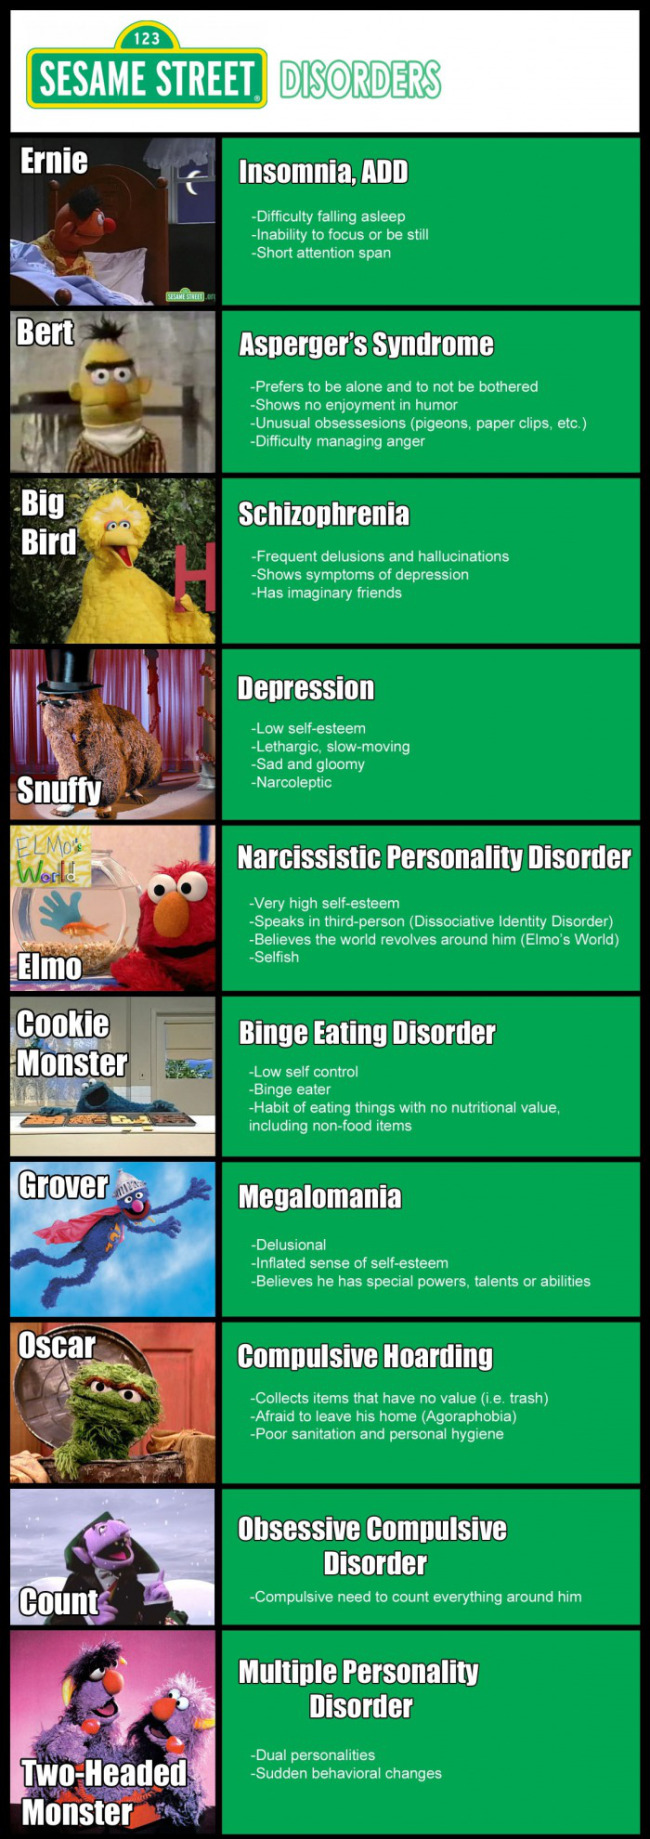 Every Sesame Street Character Is Suffering From Severe Mental Disorders